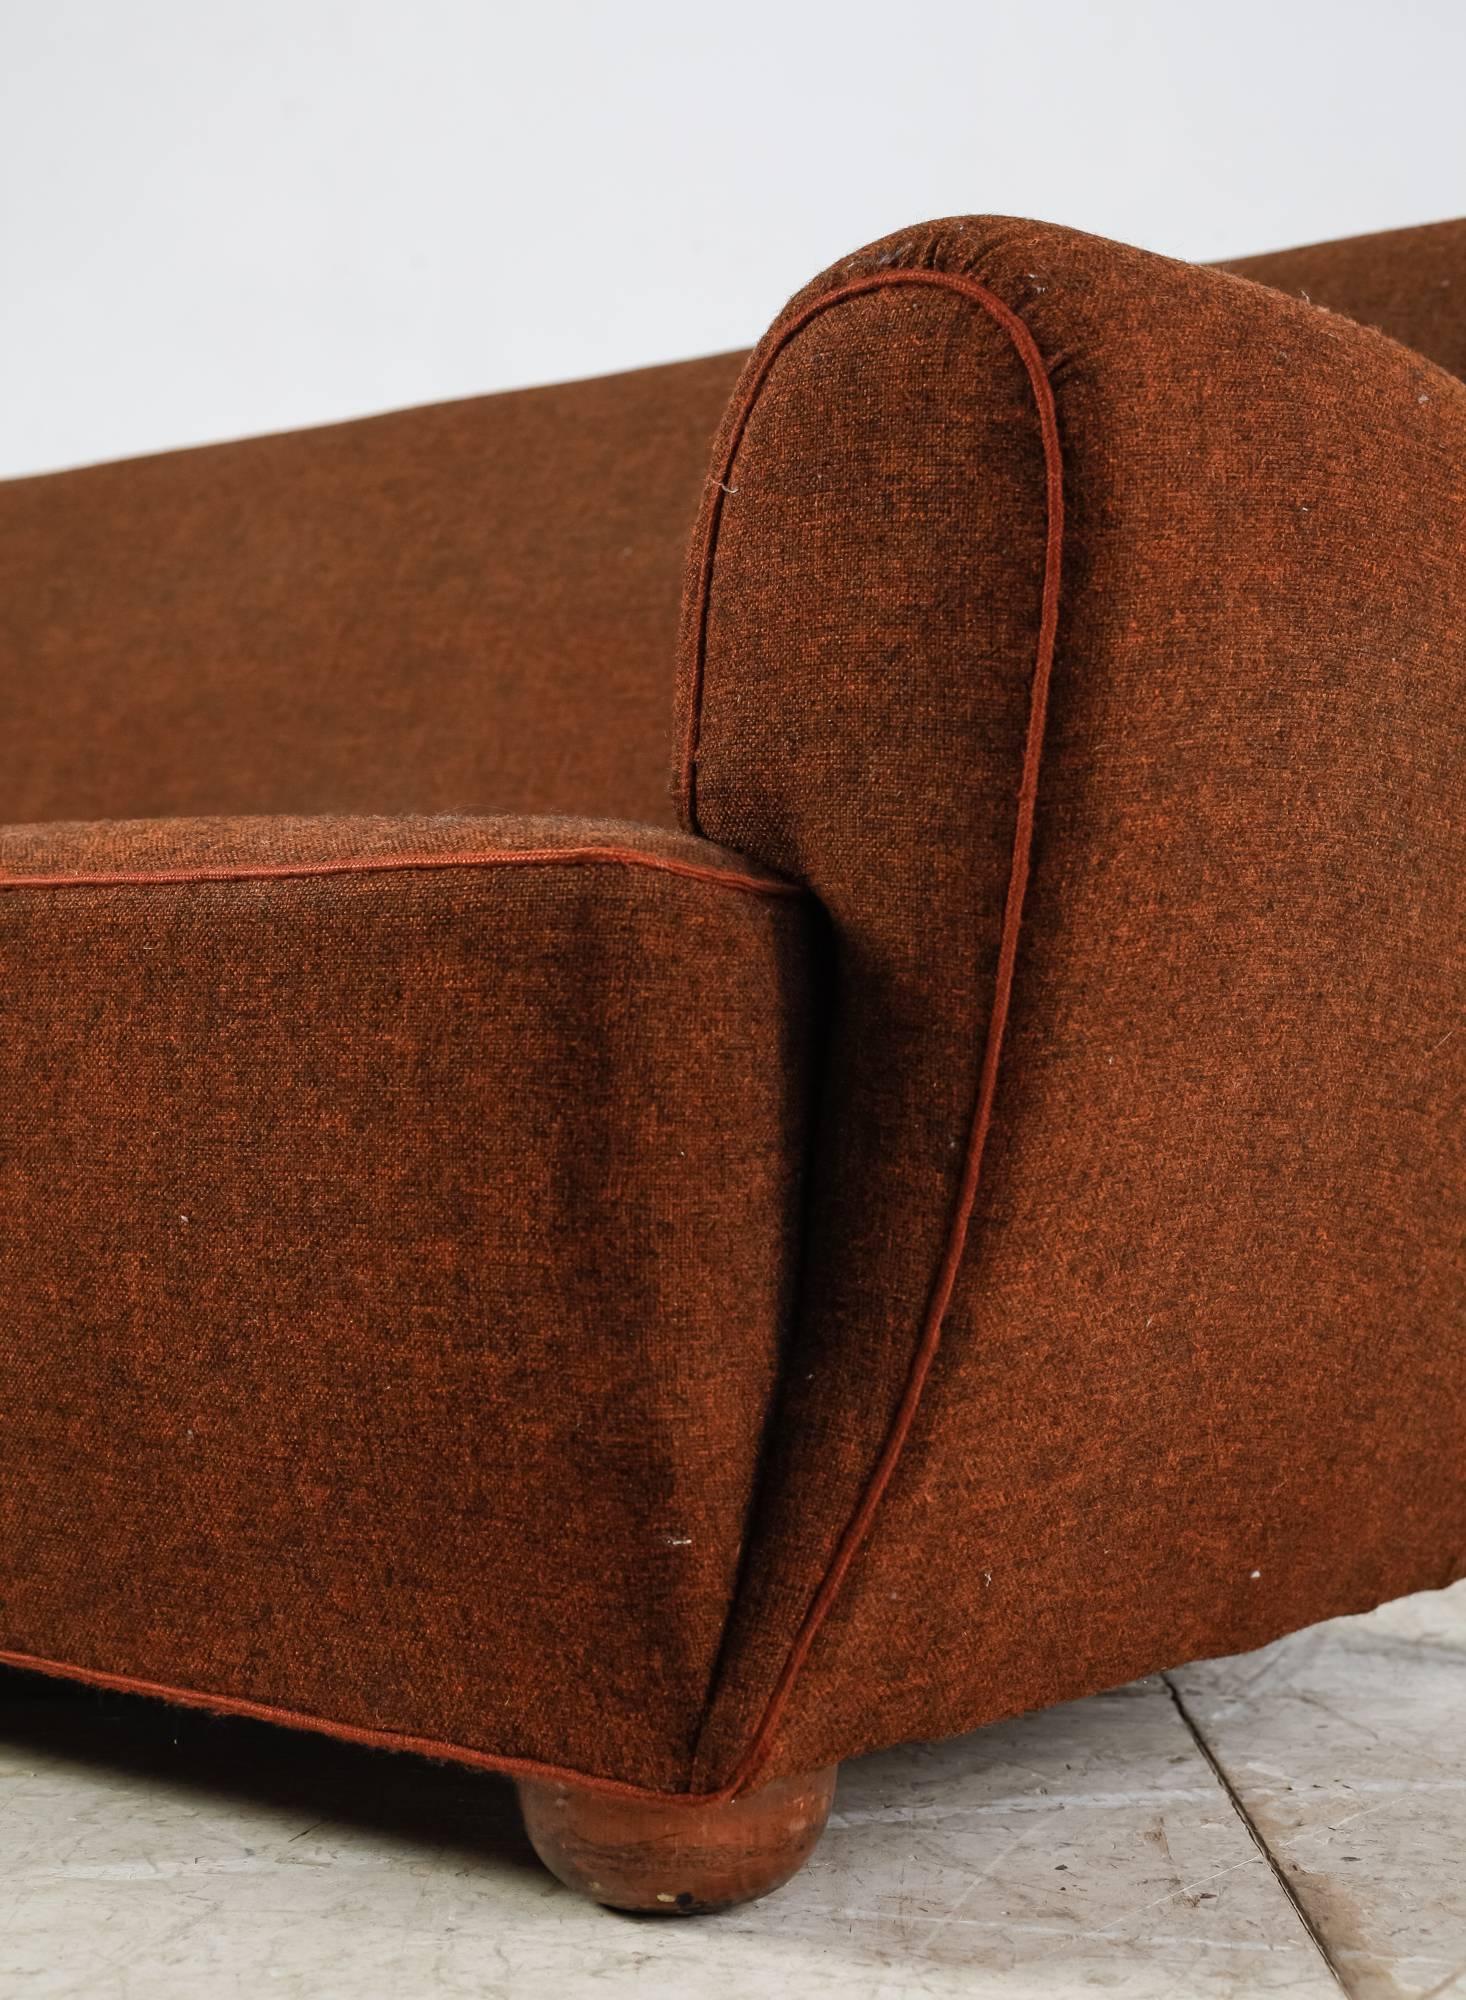 Danish Rounded Three-Seat Sofa with Brown Wool Upholstery, 1940s For Sale 3